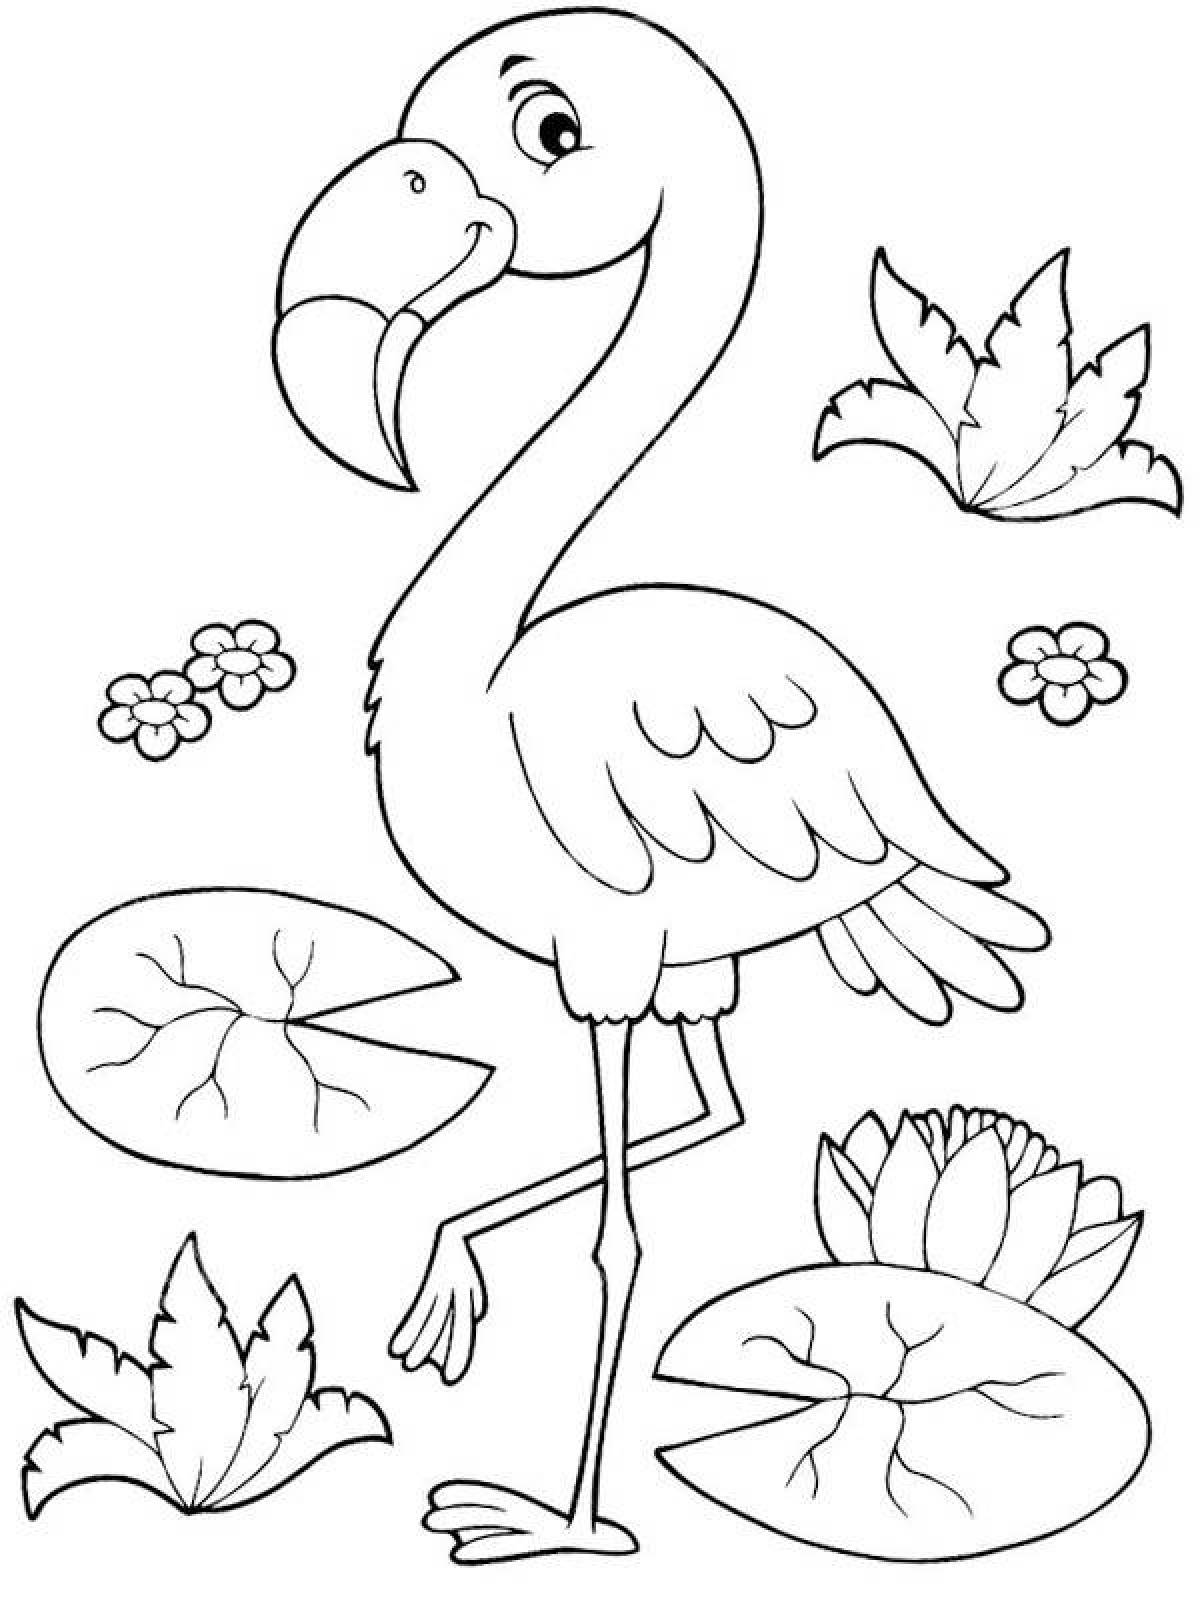 Flamingo coloring pages for kids